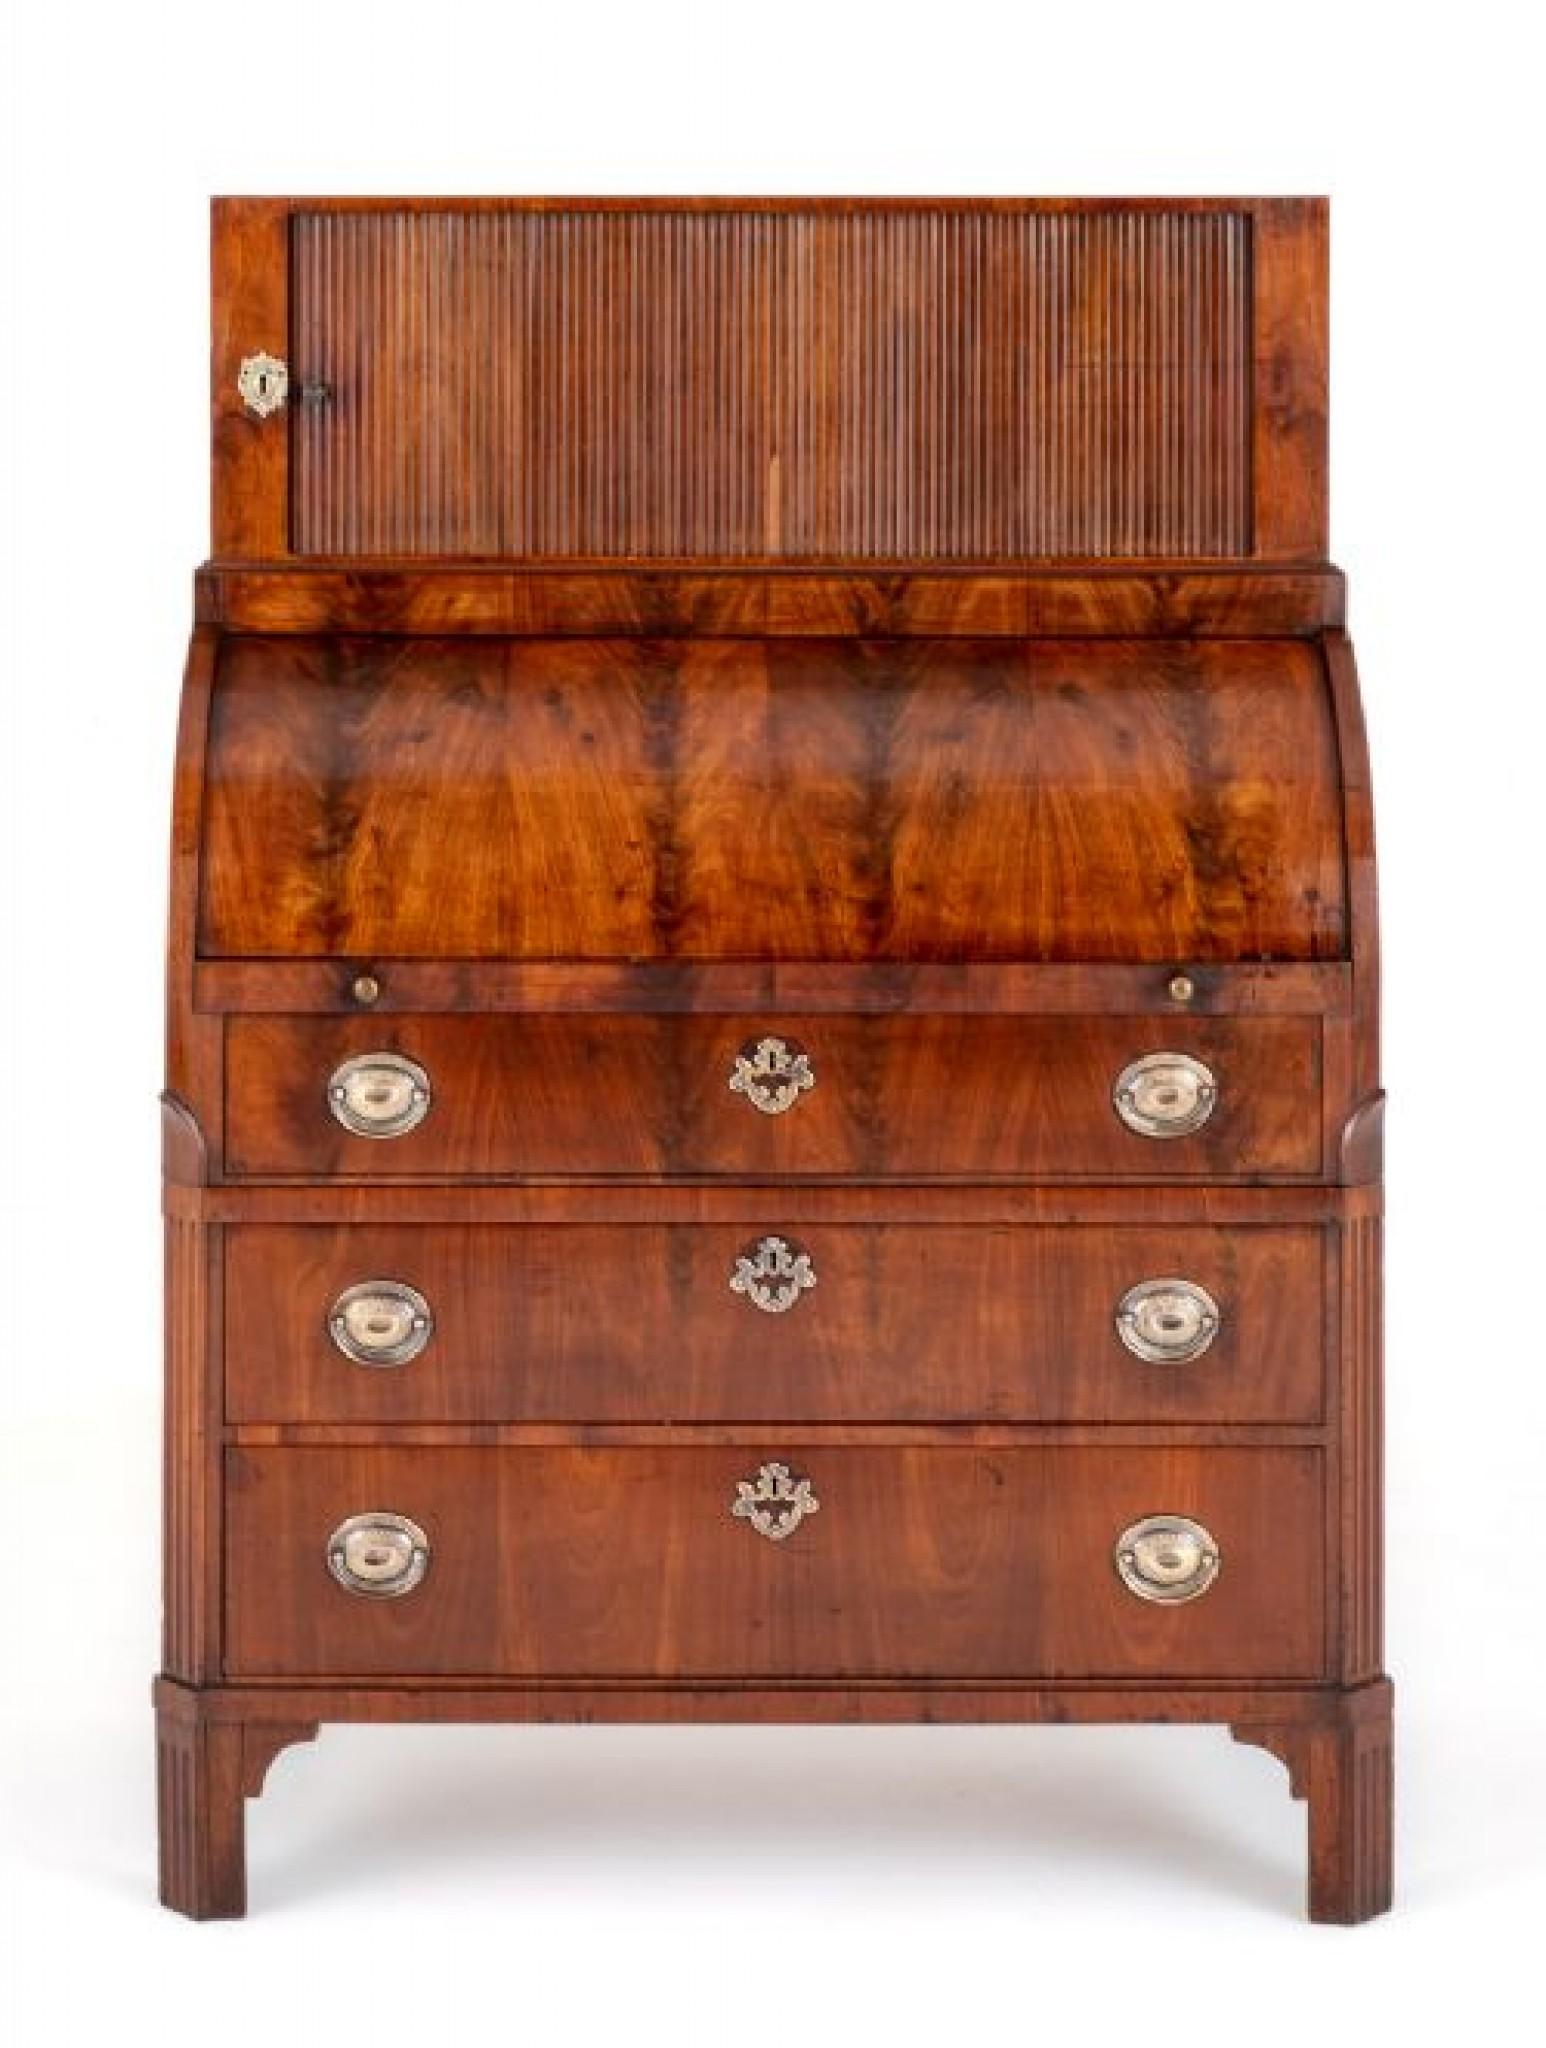 Late 19th Century Regency Cylinder Desk Mahogany Furniture, 19th Century For Sale